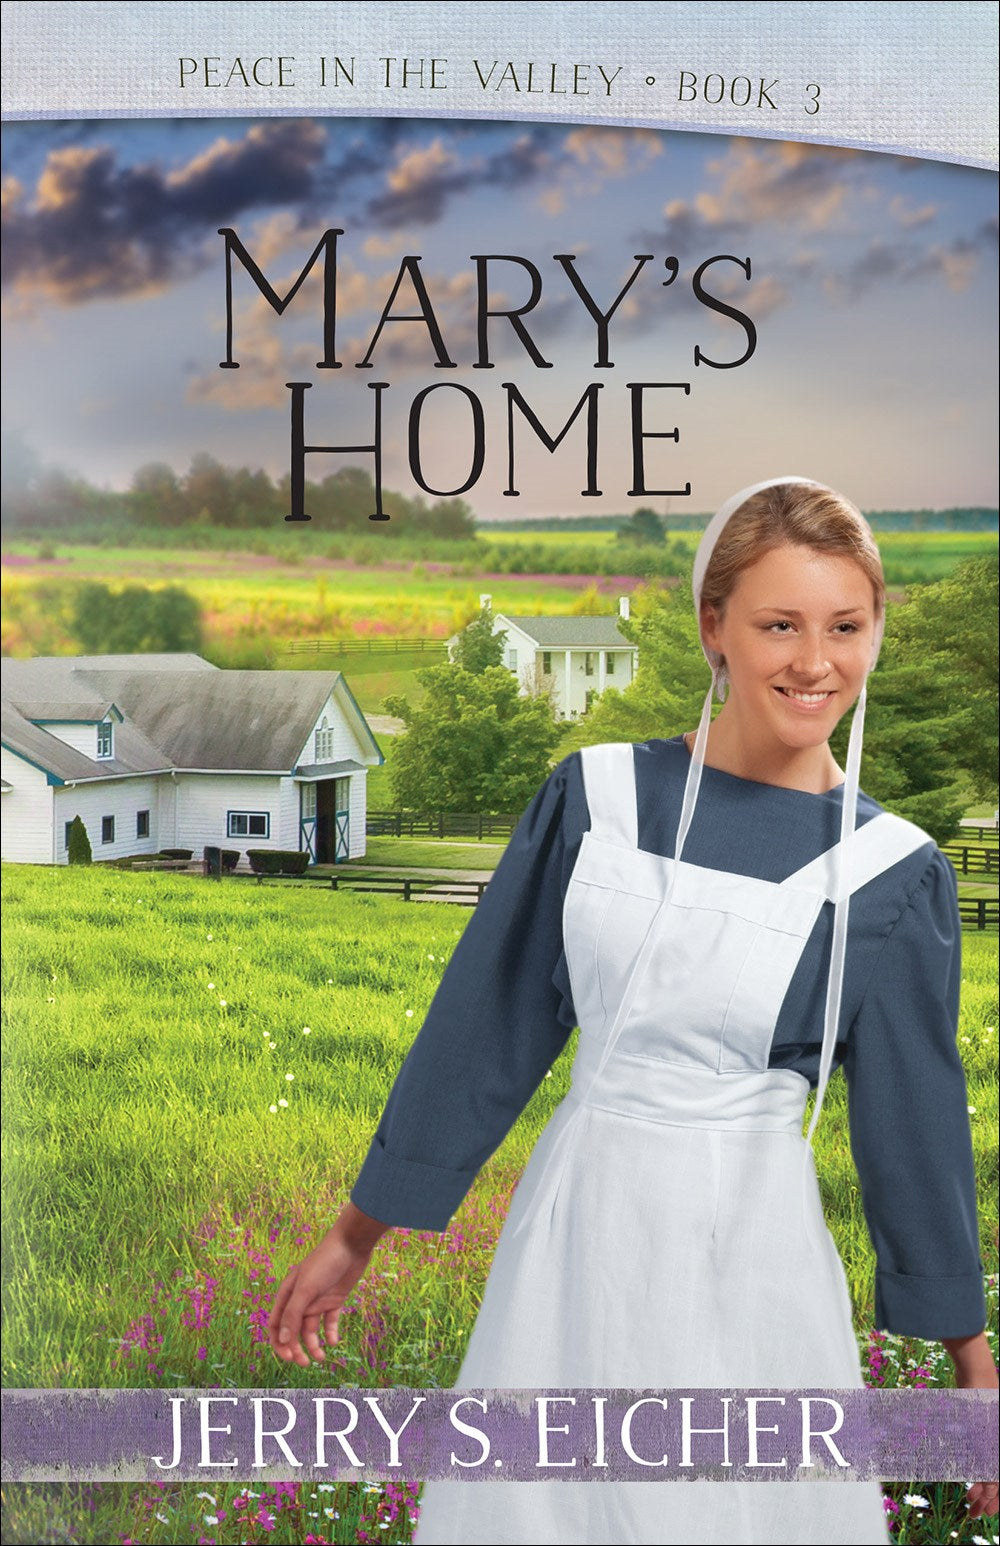 Mary's Home (Peace In The Valley Book 3)